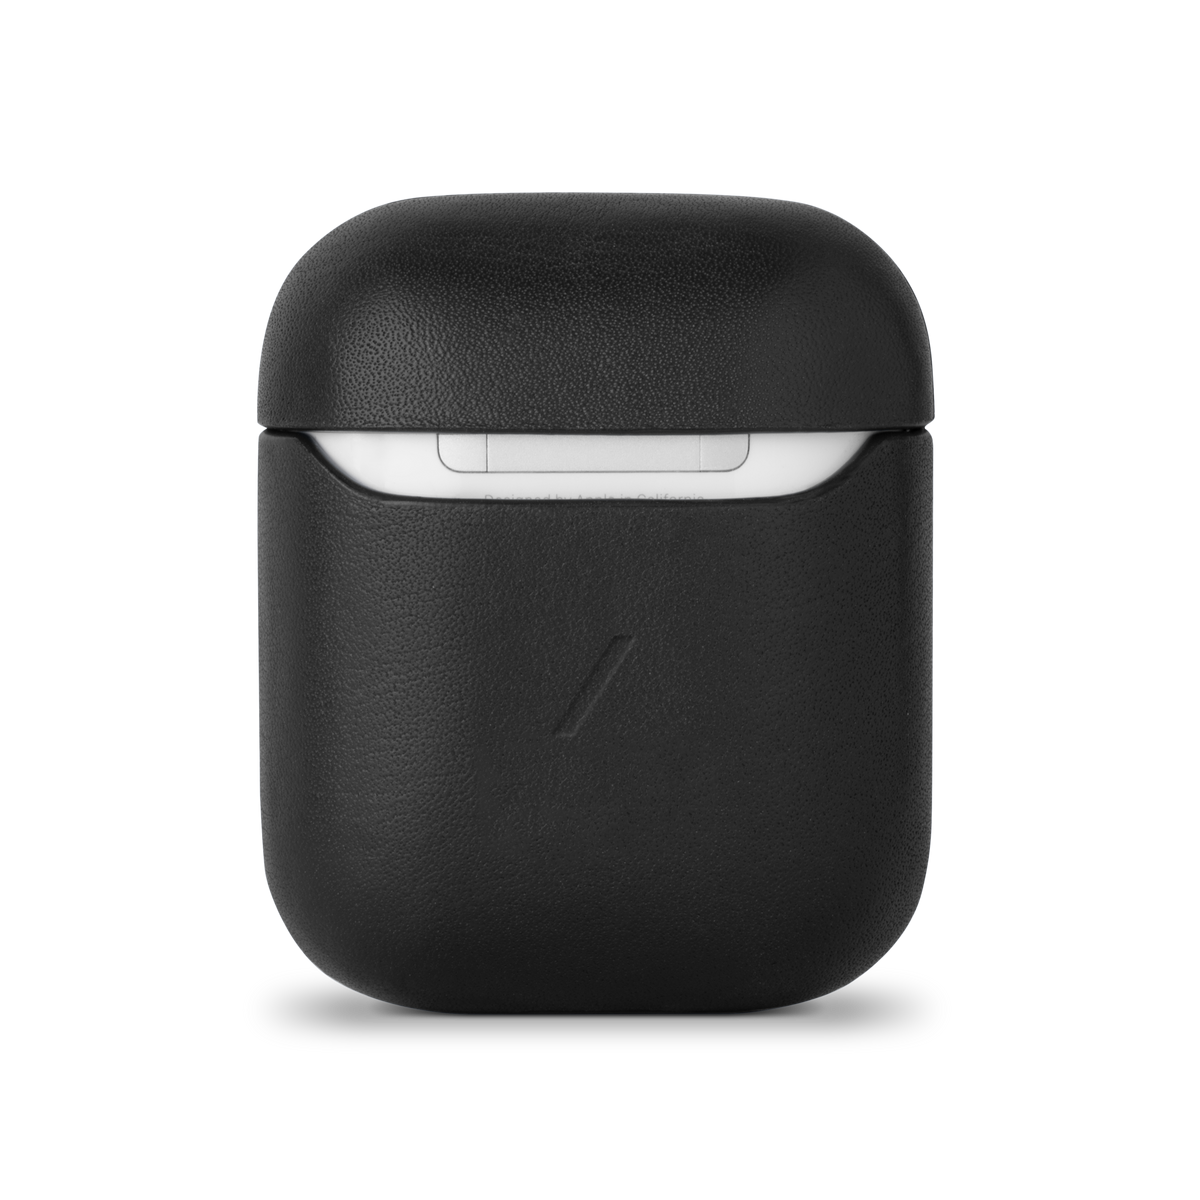 NATIVE UNION Classic Leather Case for Airpods - Black